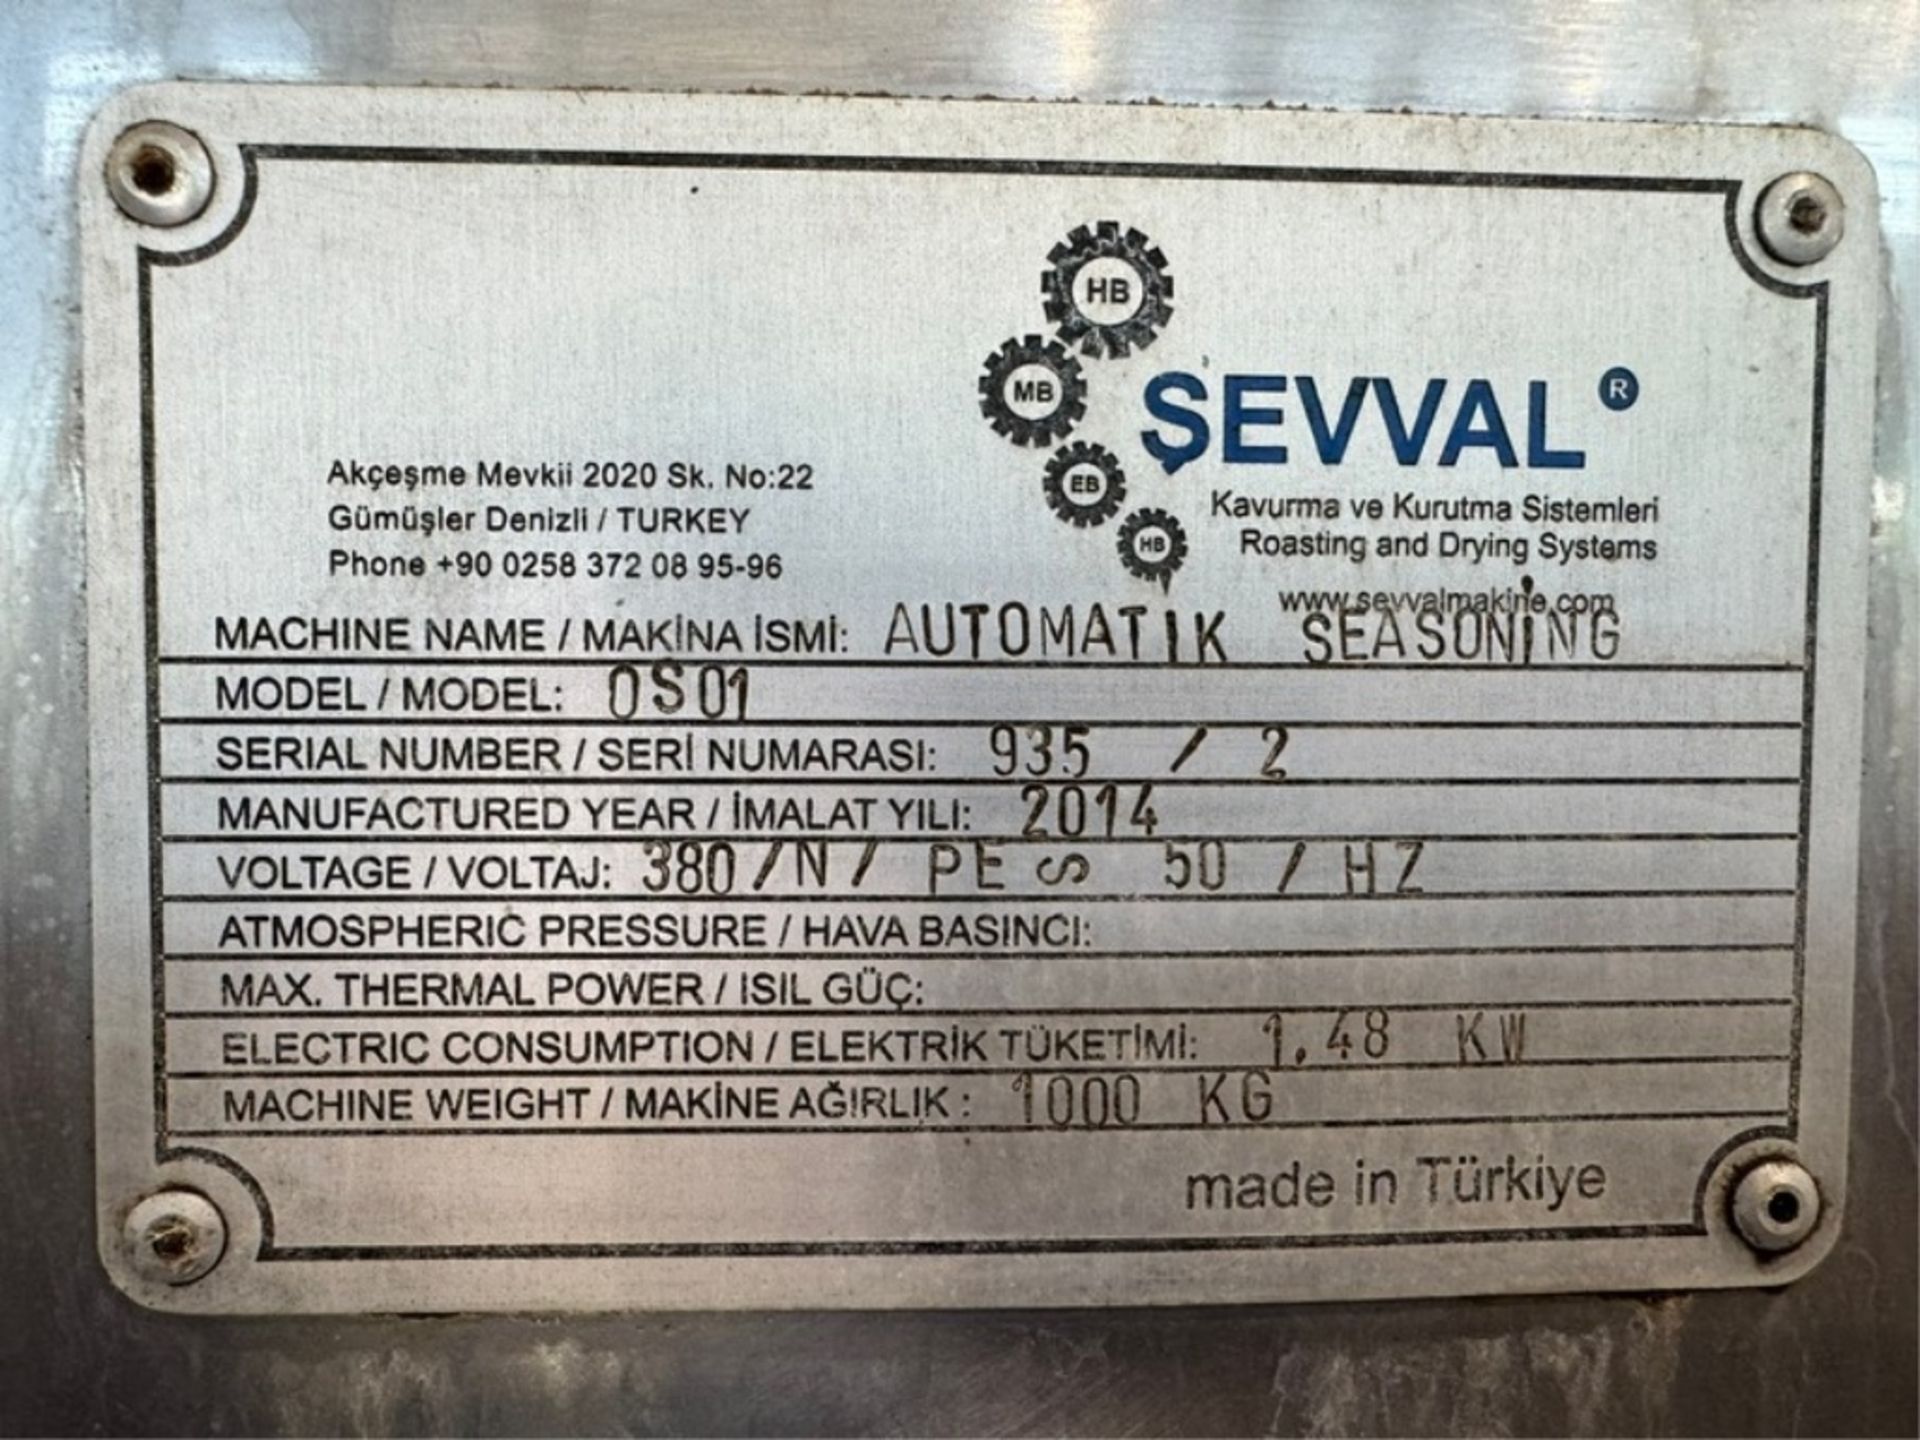 2014 SEVVAL Automatik Seasoning Tumbler, M/N 0S01, S/N 935/2, 380 Volts, with S/S Shaker Deck - Image 11 of 14